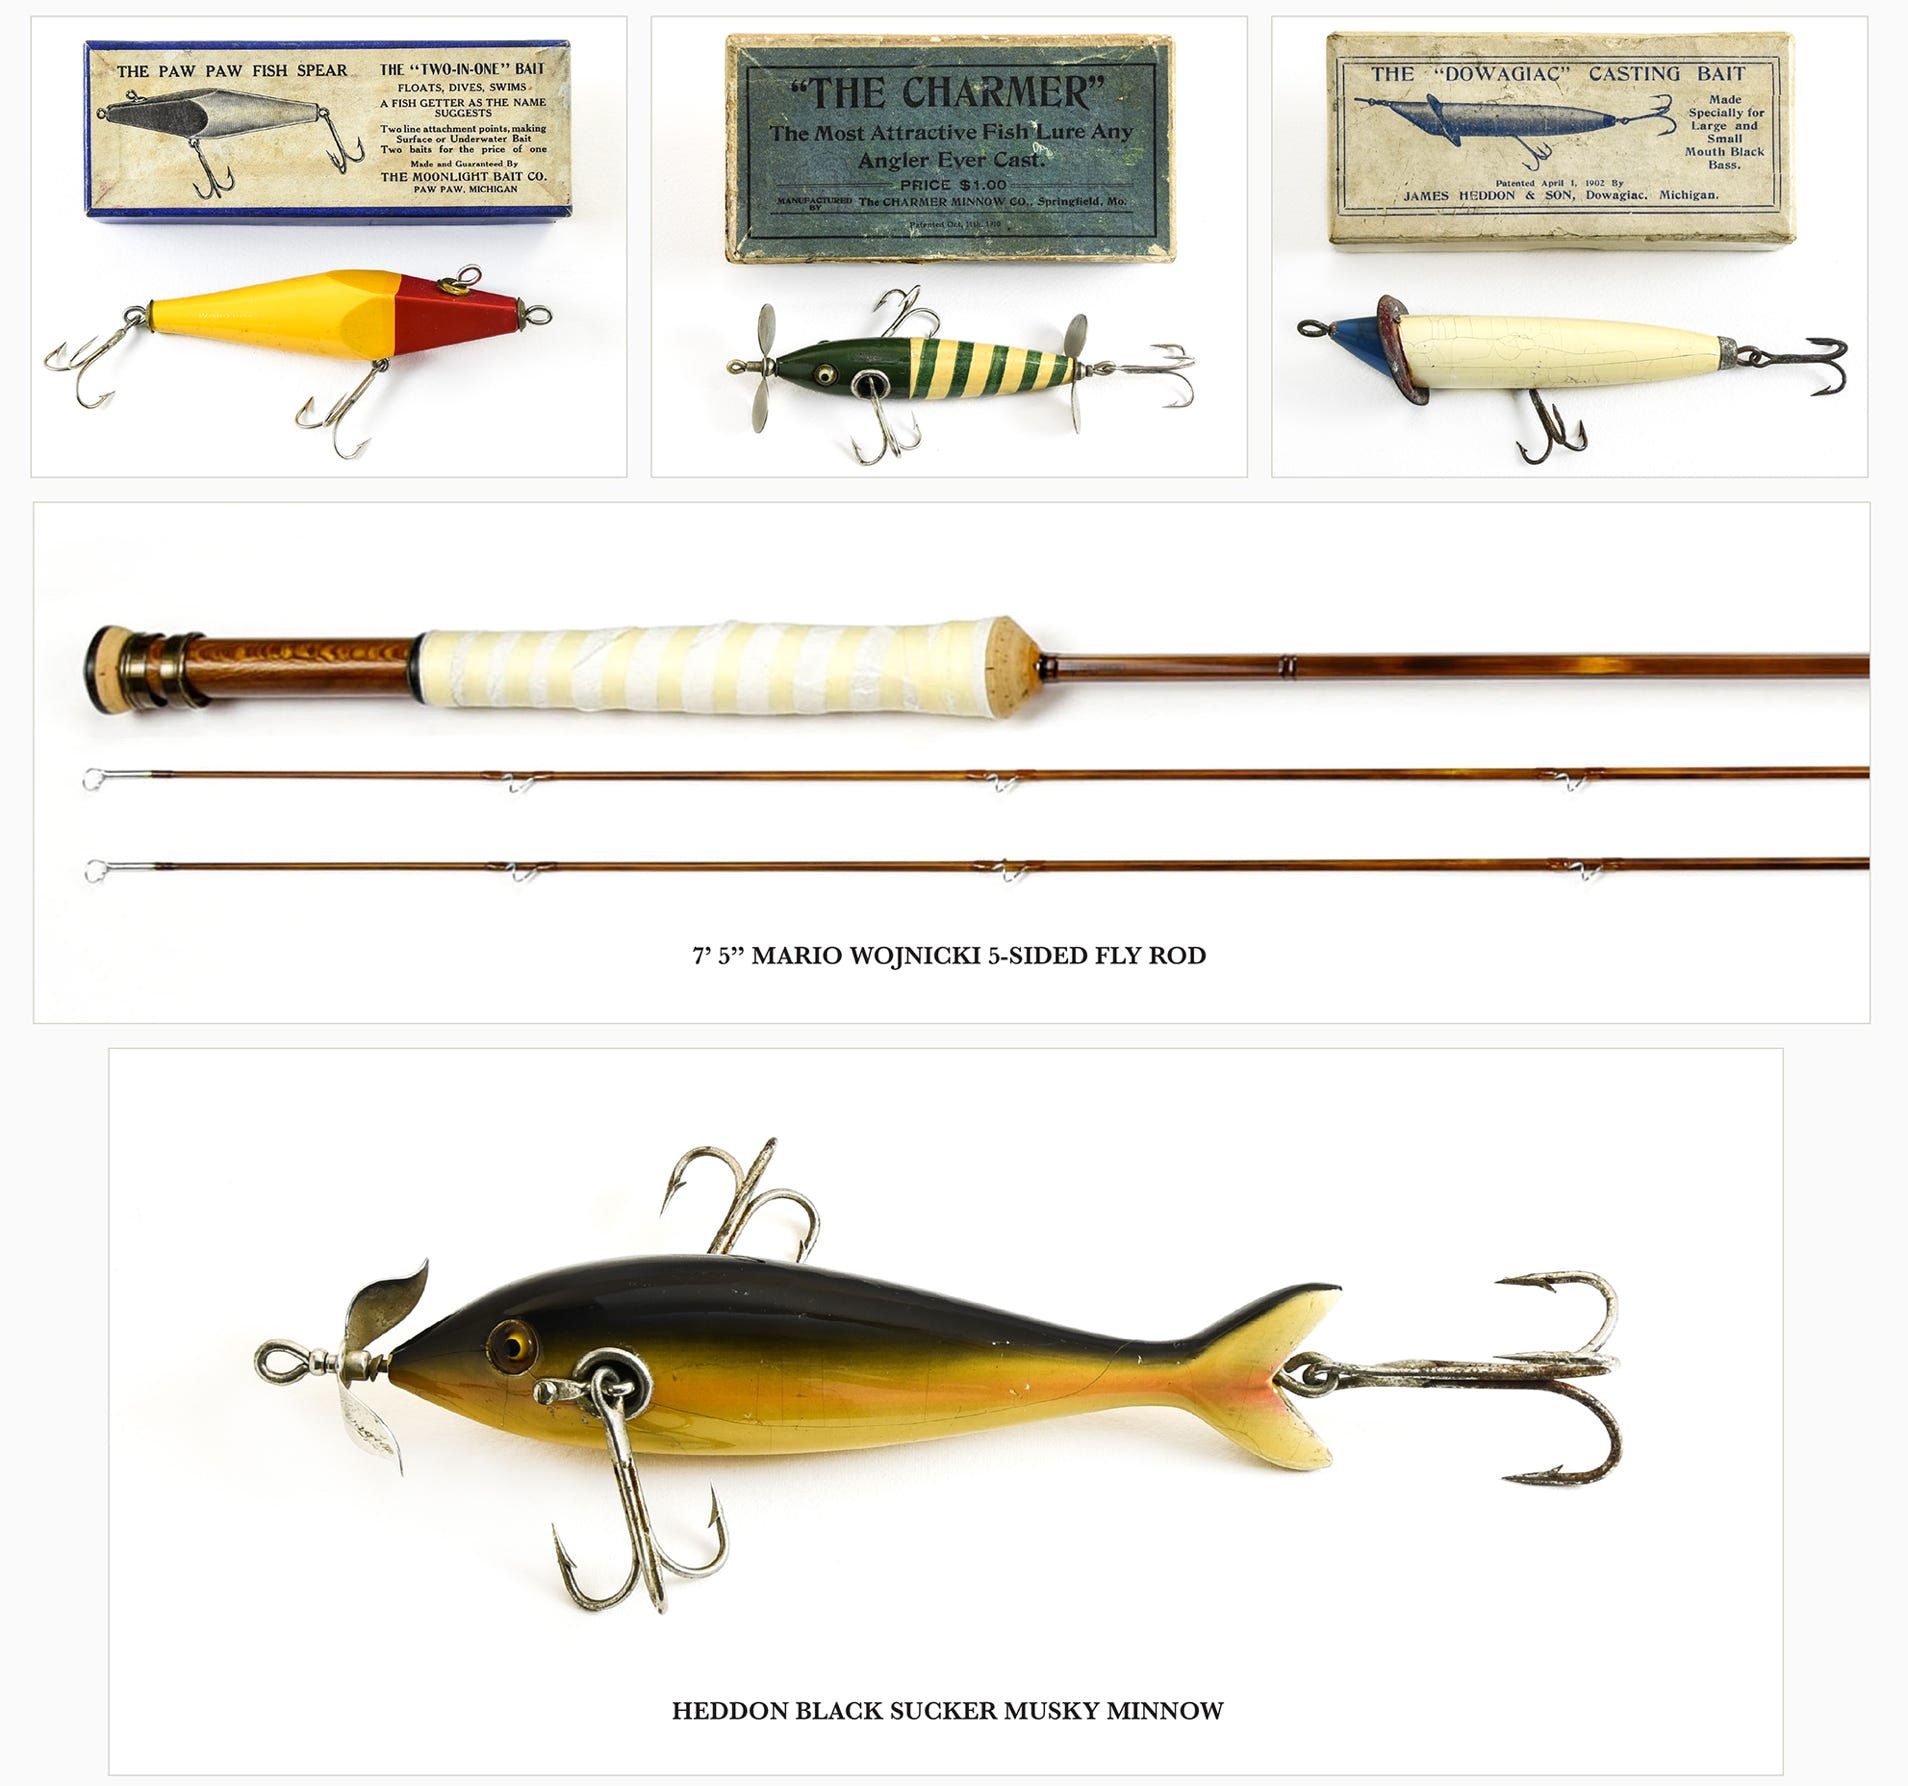 Sold at Auction: Two Cases of Antique and Vintage Fishing Lures